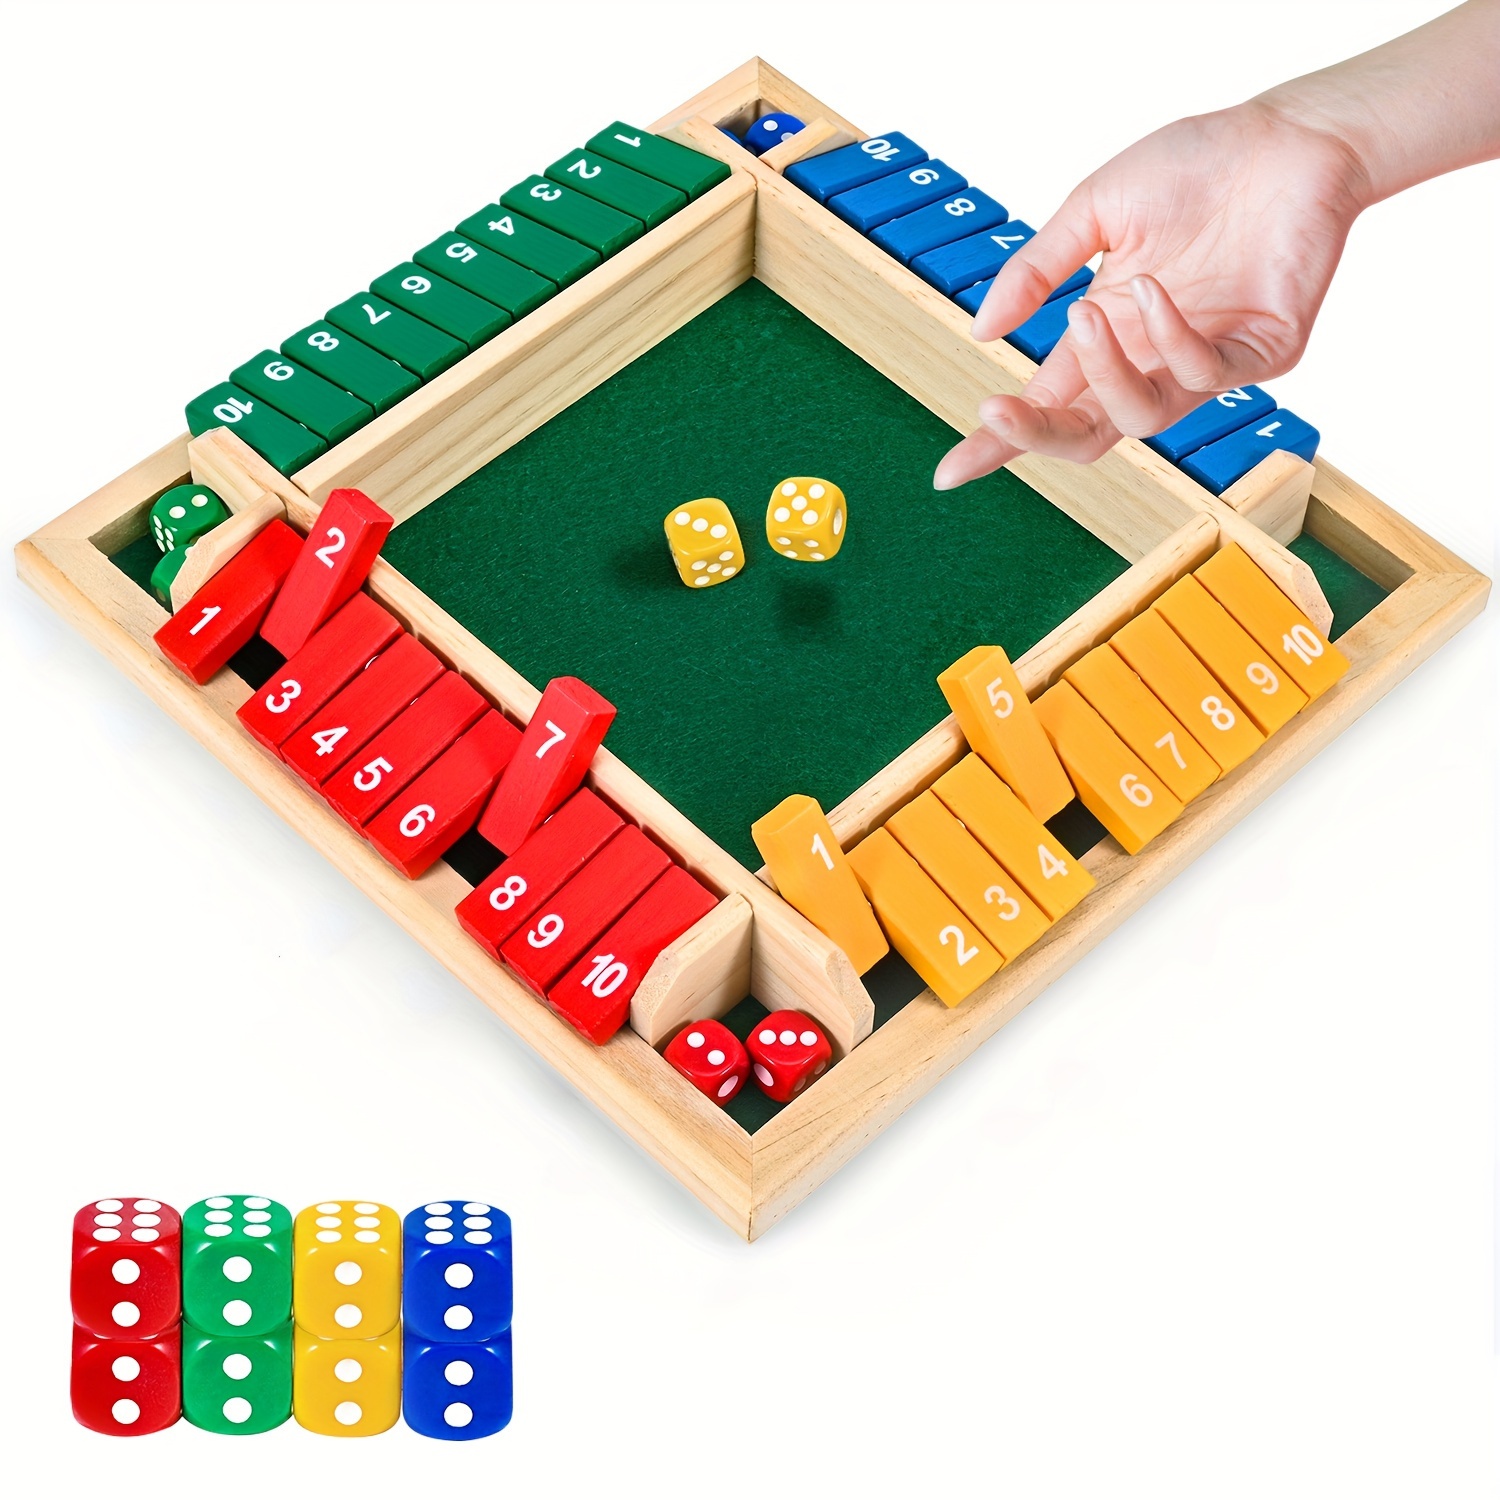 

2-4 Players Wooden Dice Game Fun Family Classic Games Table Mat Game For Parties Gatherings